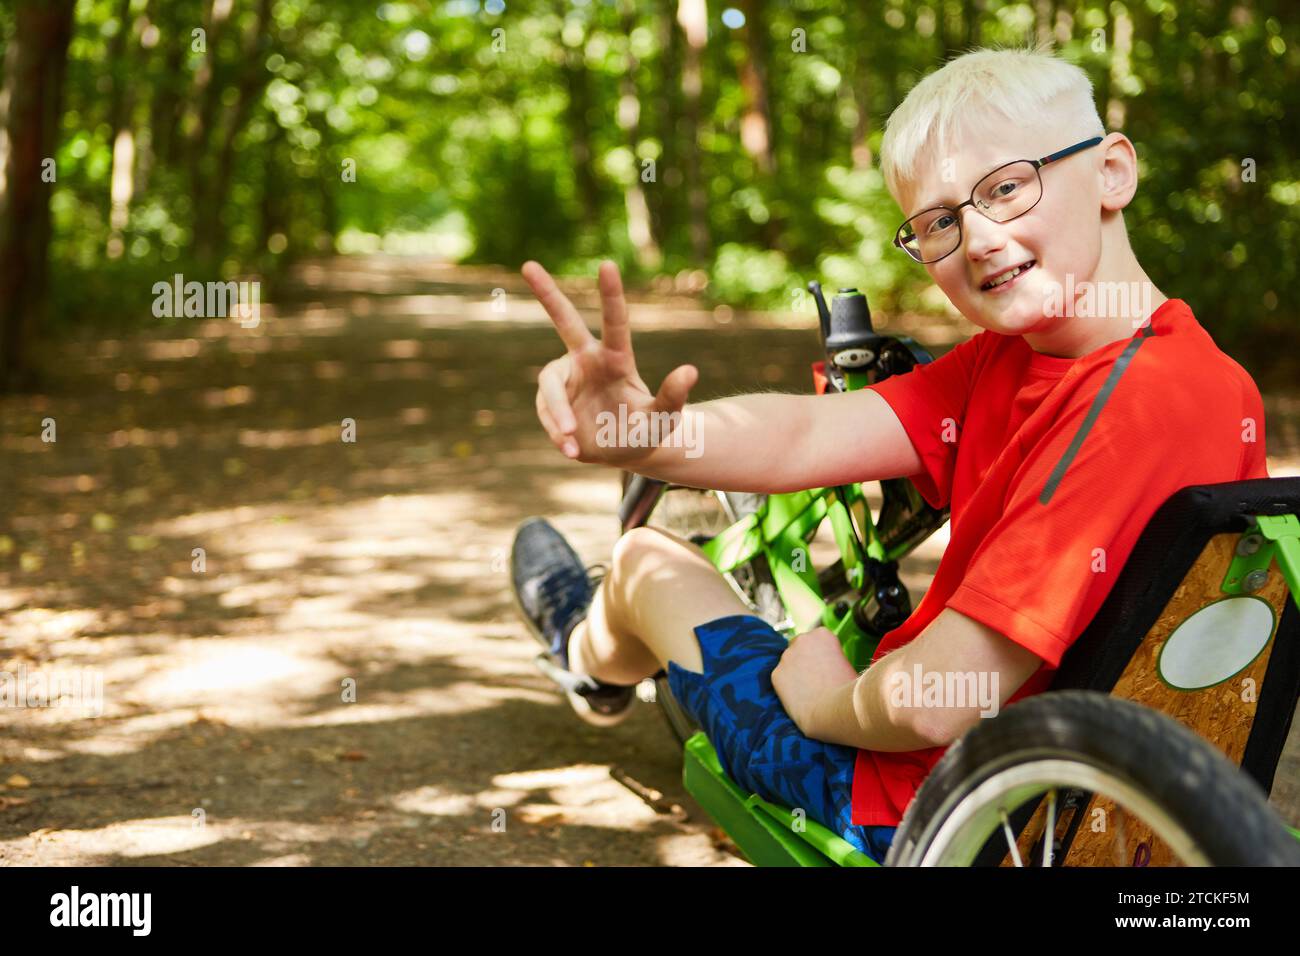 Portrait of smiling boy showing peace sign while sitting on recumbent bike at forest Stock Photo